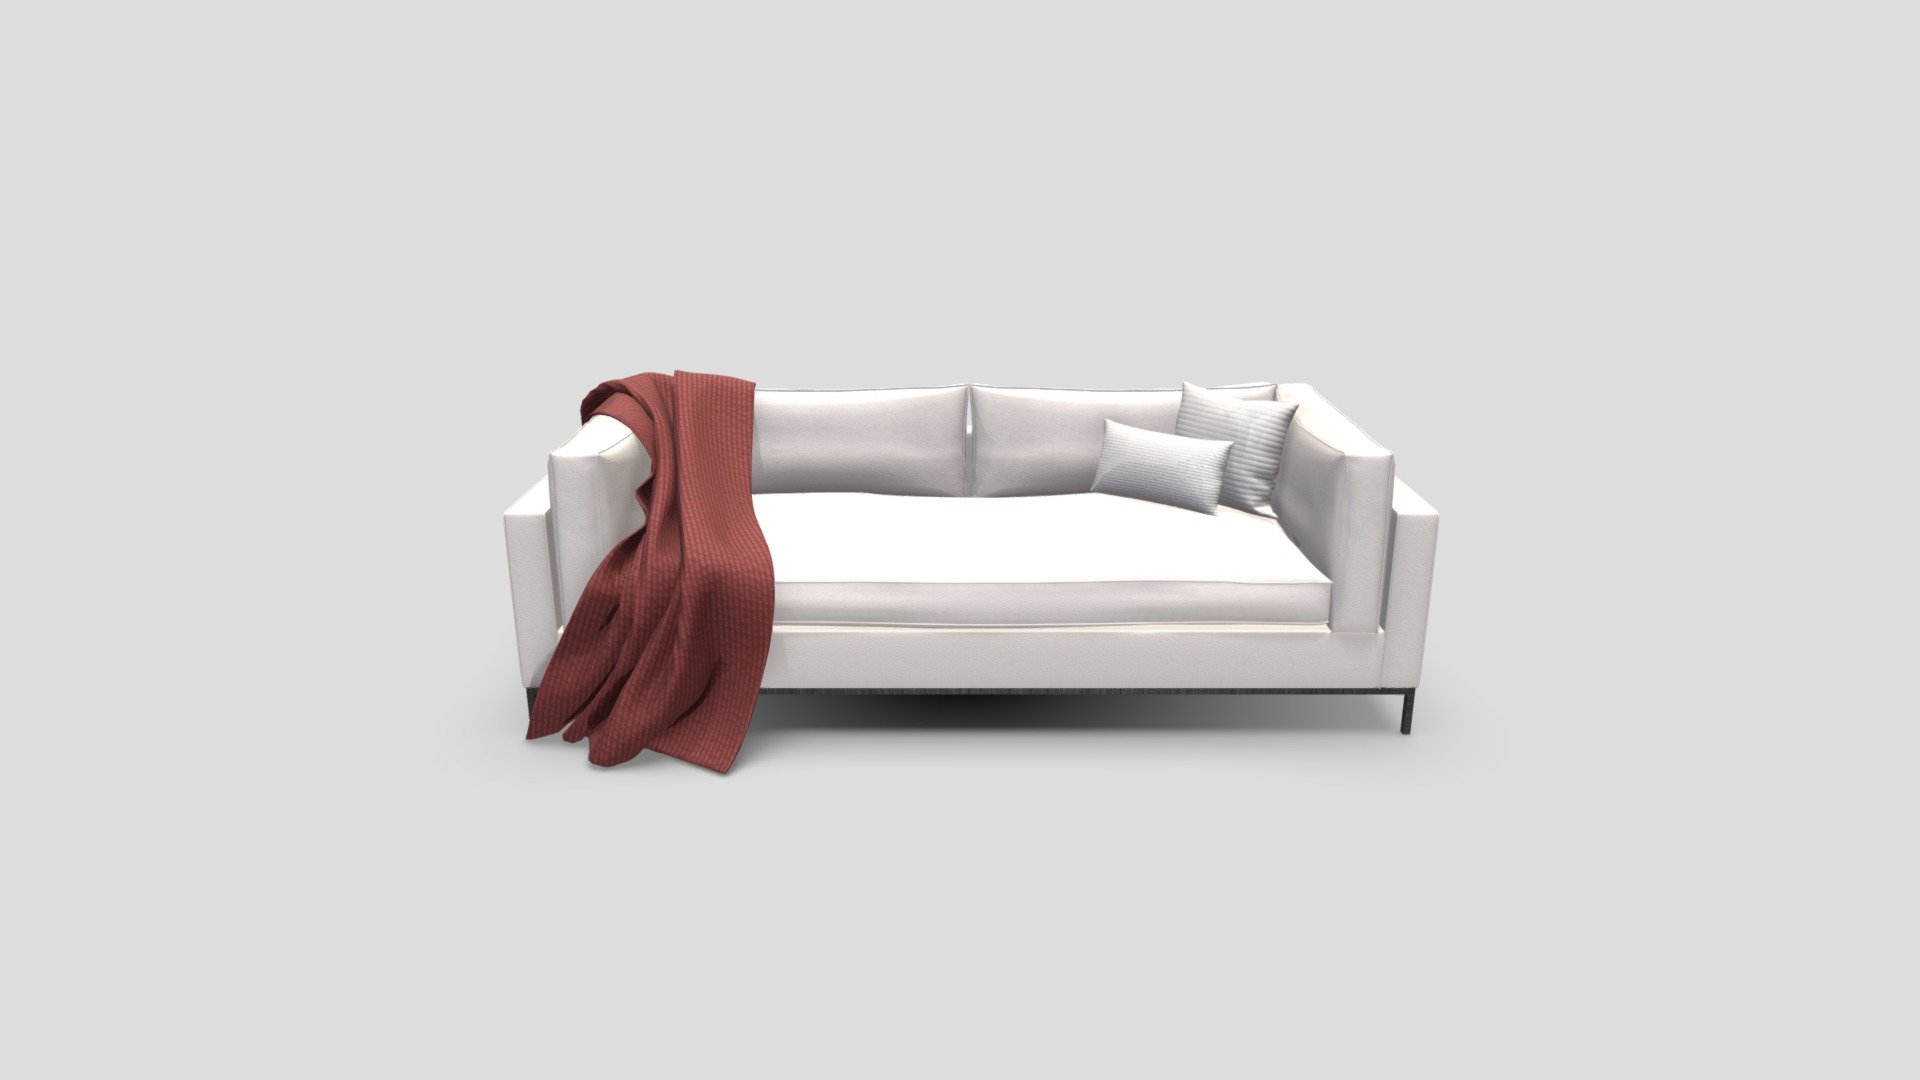 This couch’s mesh was created entirely within Autodesk Maya, right down to the cloth and pillows (which were crafted using Maya’s nCloth simulation system). The texture was created in Substance Painter 3d model